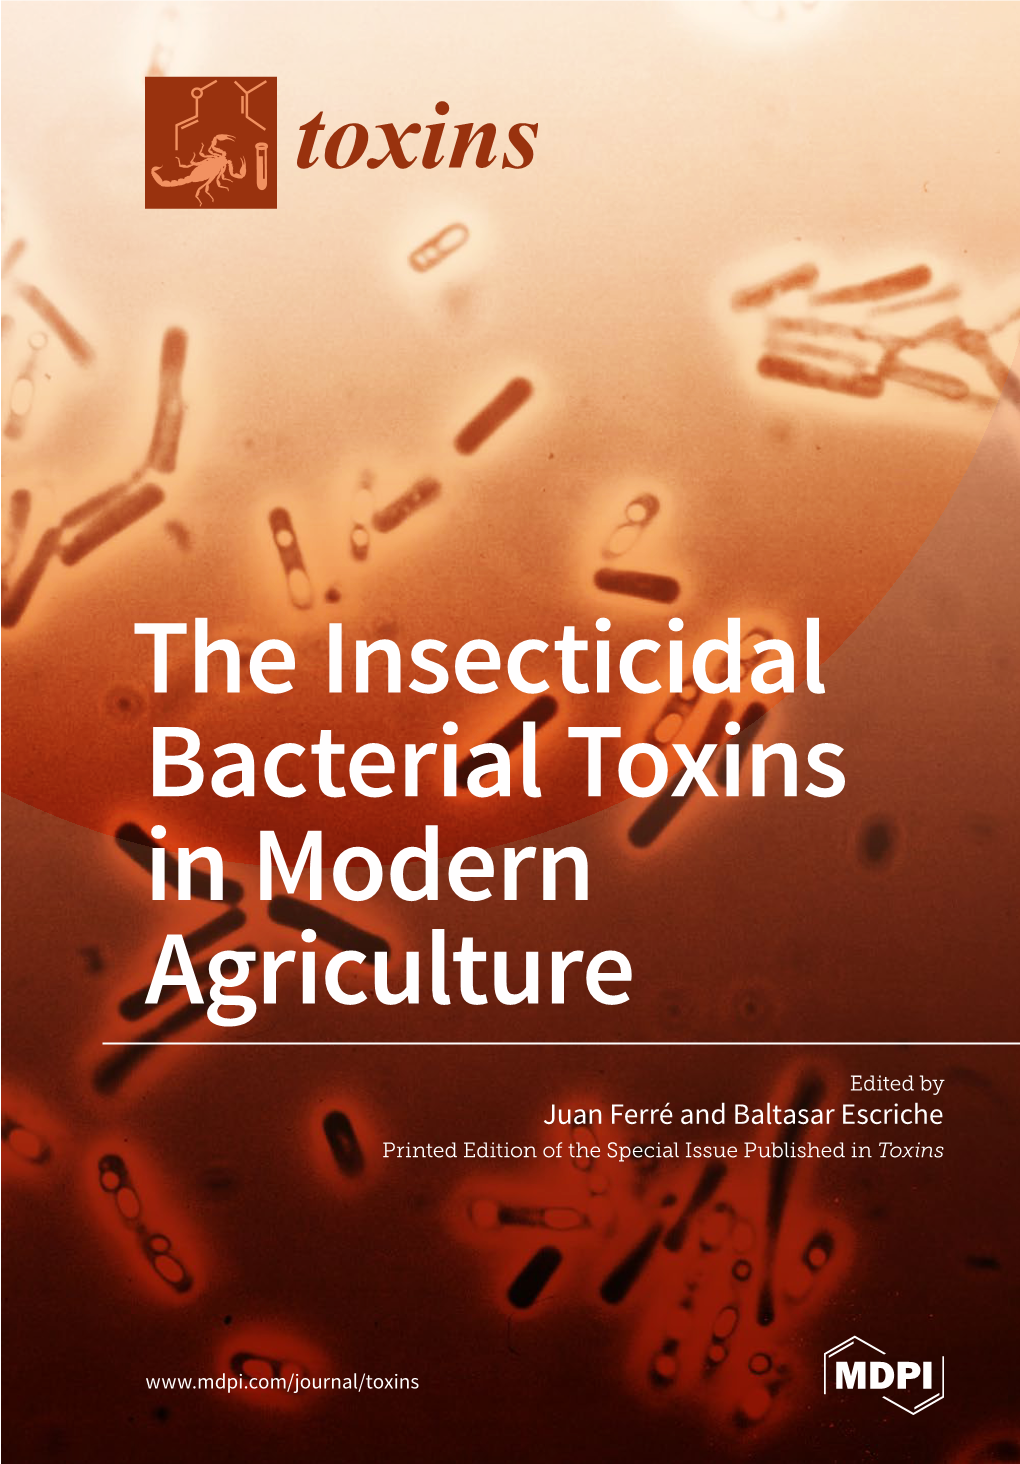 The Insecticidal Bacterial Toxins in Modern Agriculture